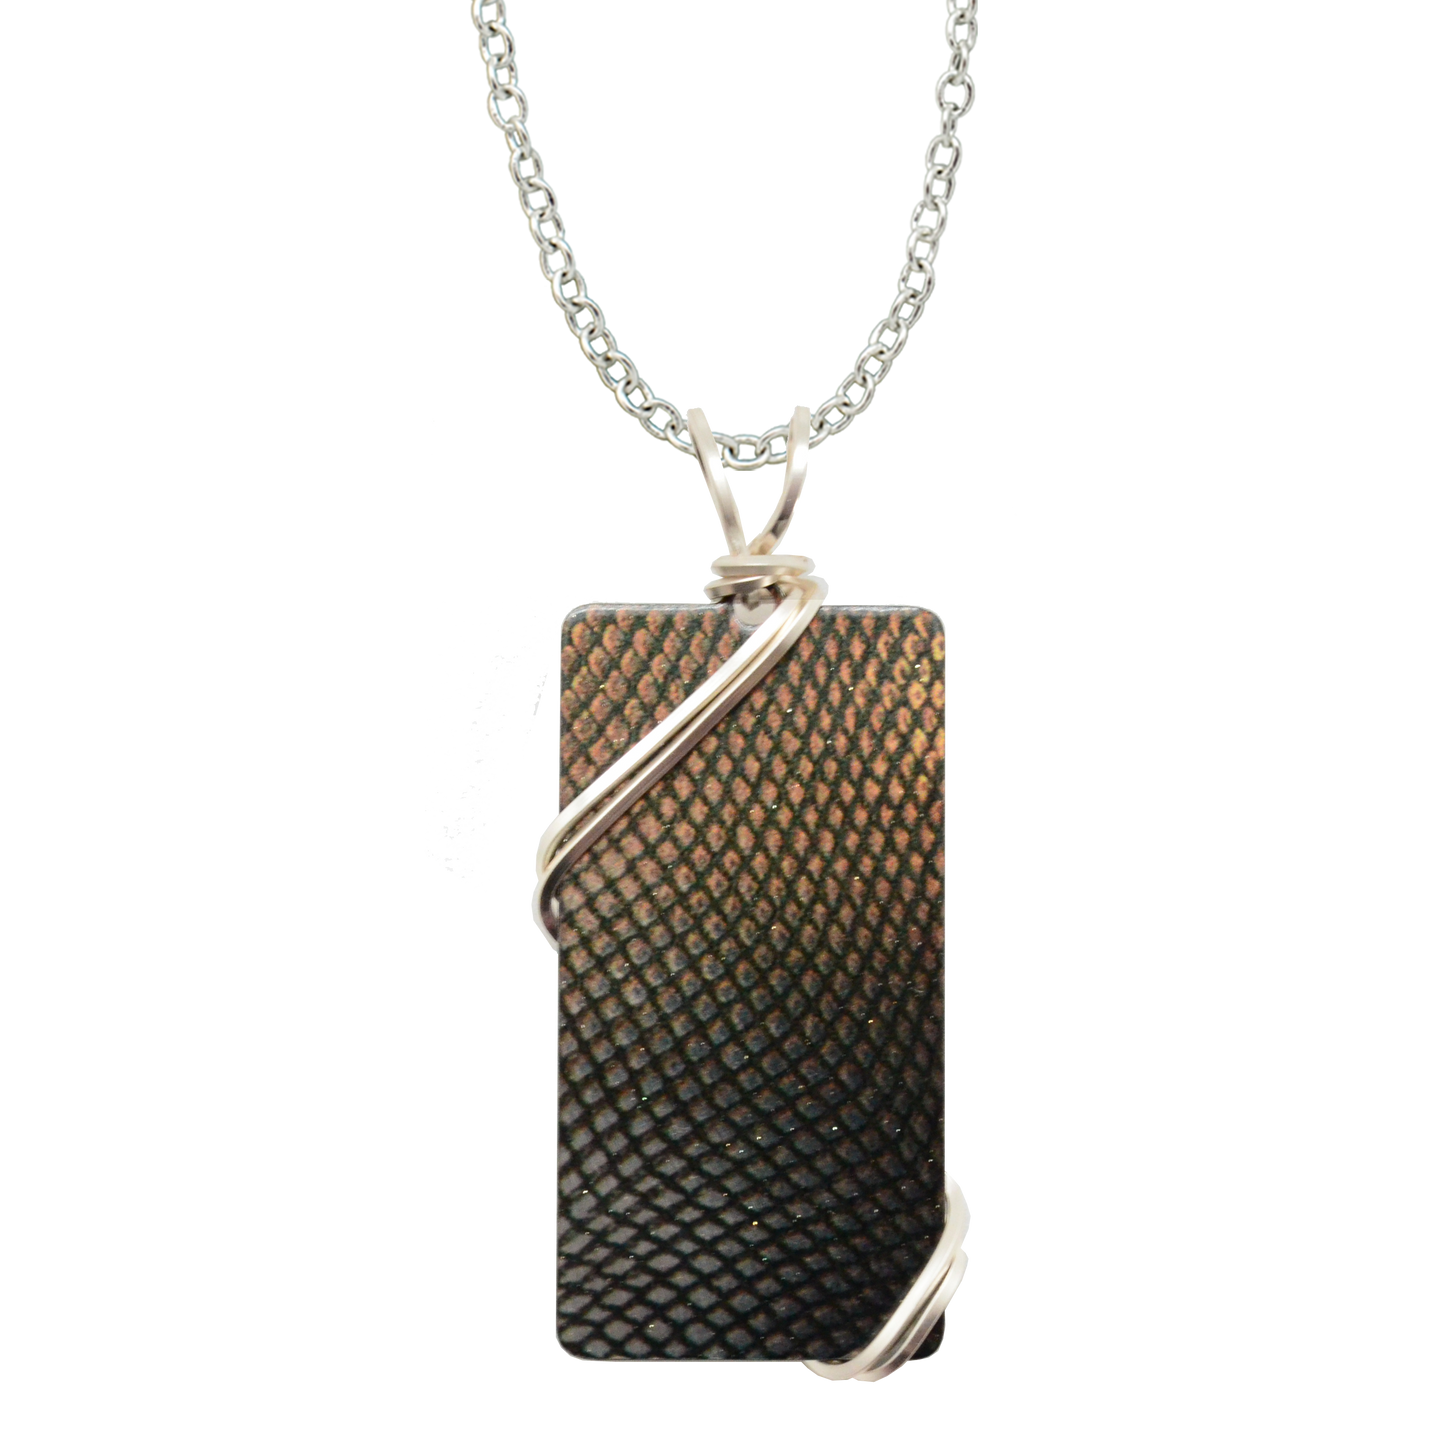 Armour / Snakeskin Necklace, 1.5" pendant with silver-plated wiring, Item# 4714X